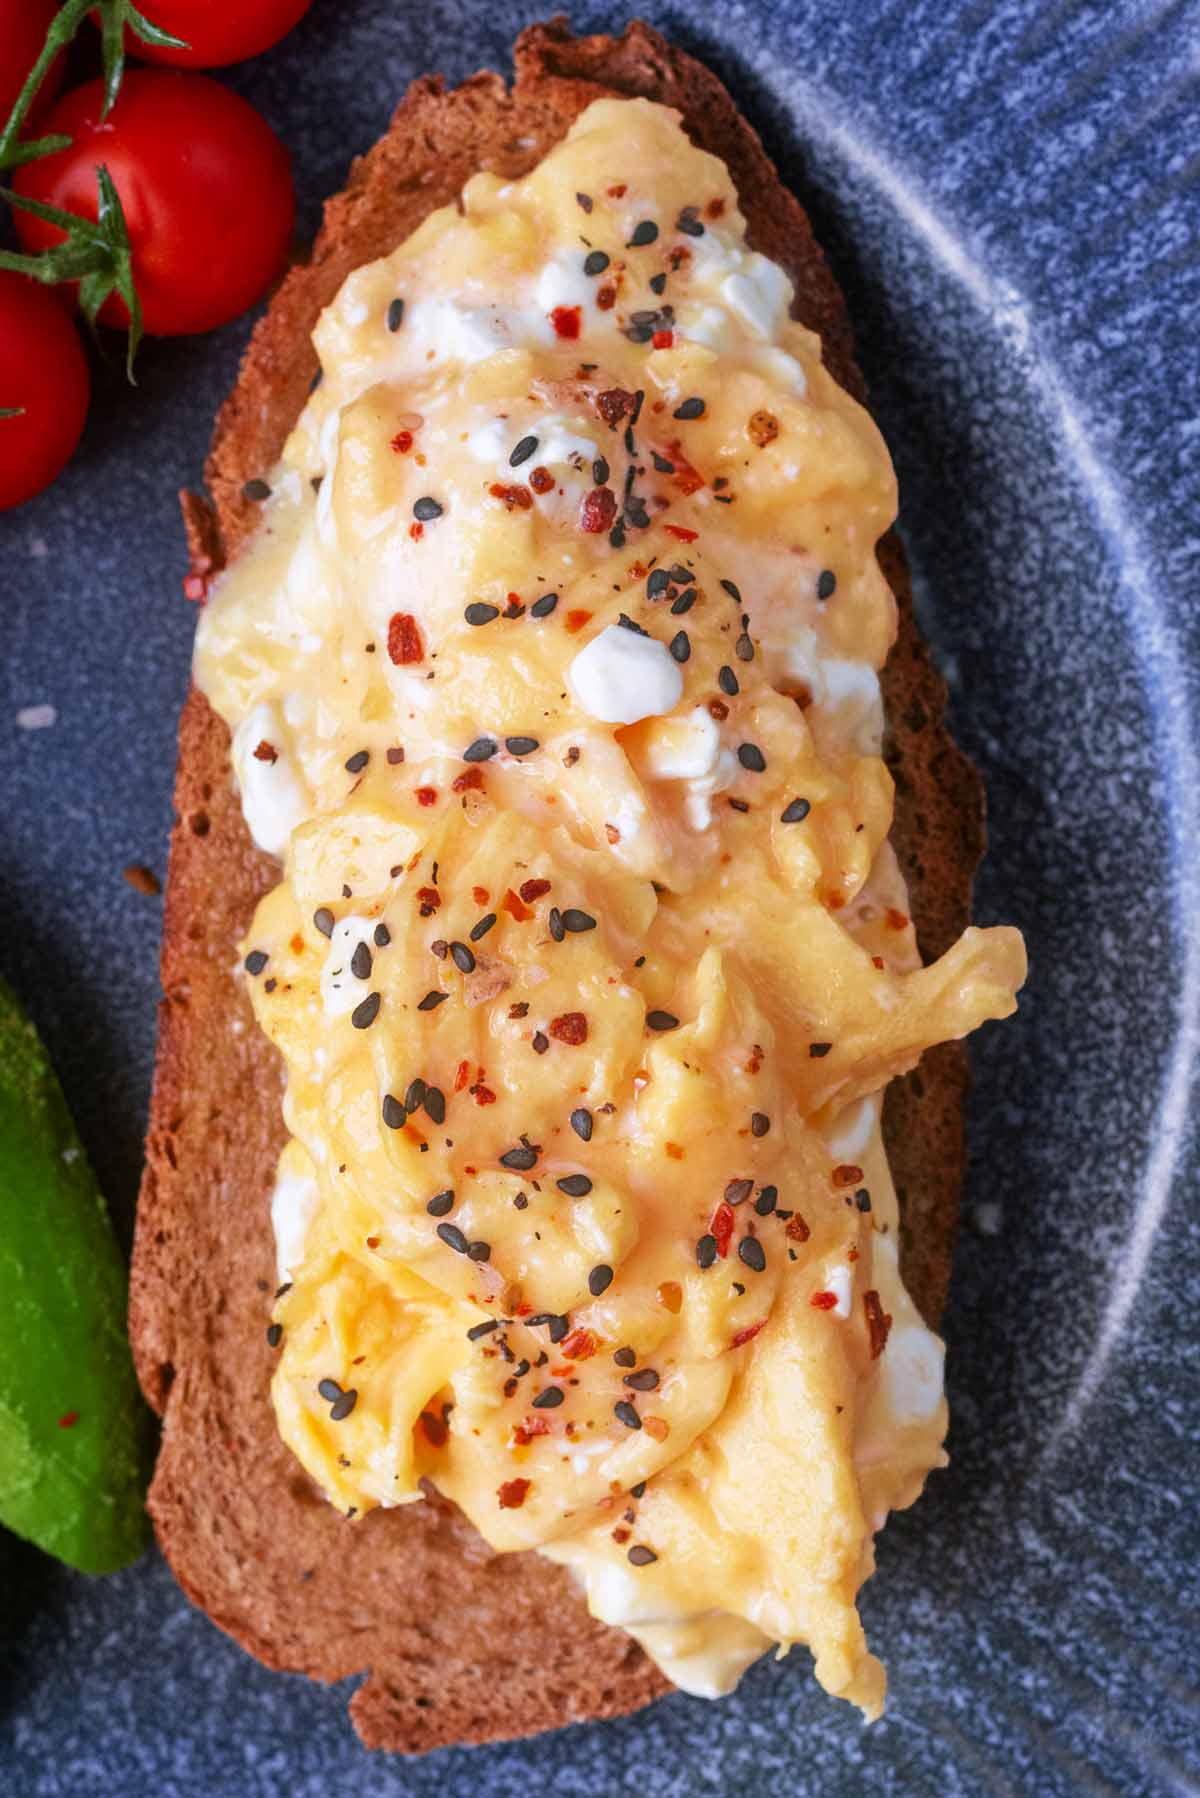 Scrambled eggs mixed with cottage cheese and topped with seasoning.